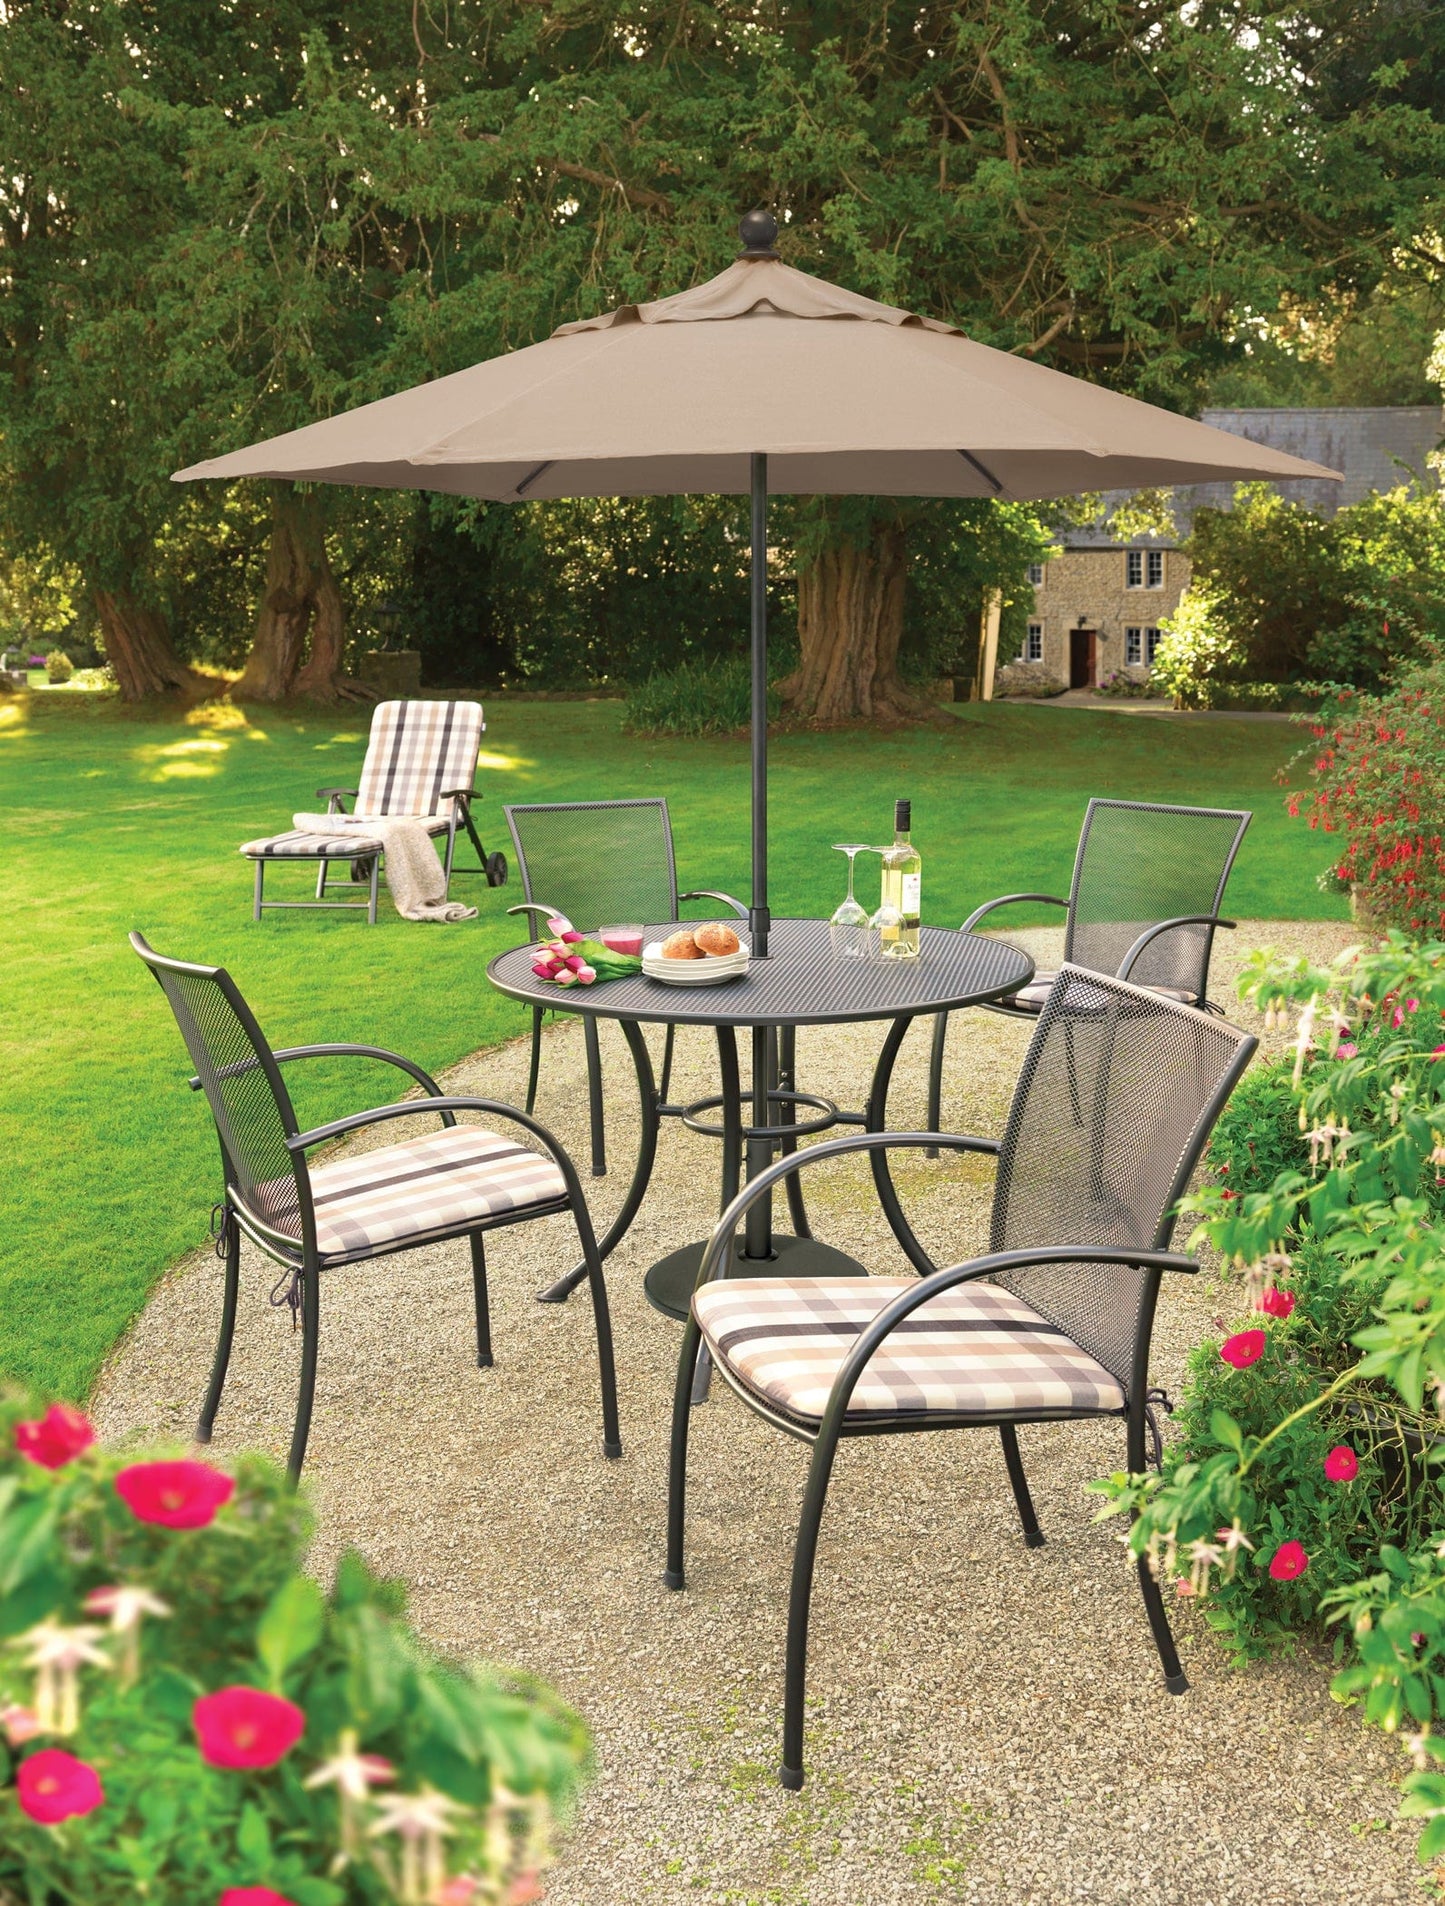 KETTLER® Pilano Iron Mesh set shown here with umbrella and chaise lounge